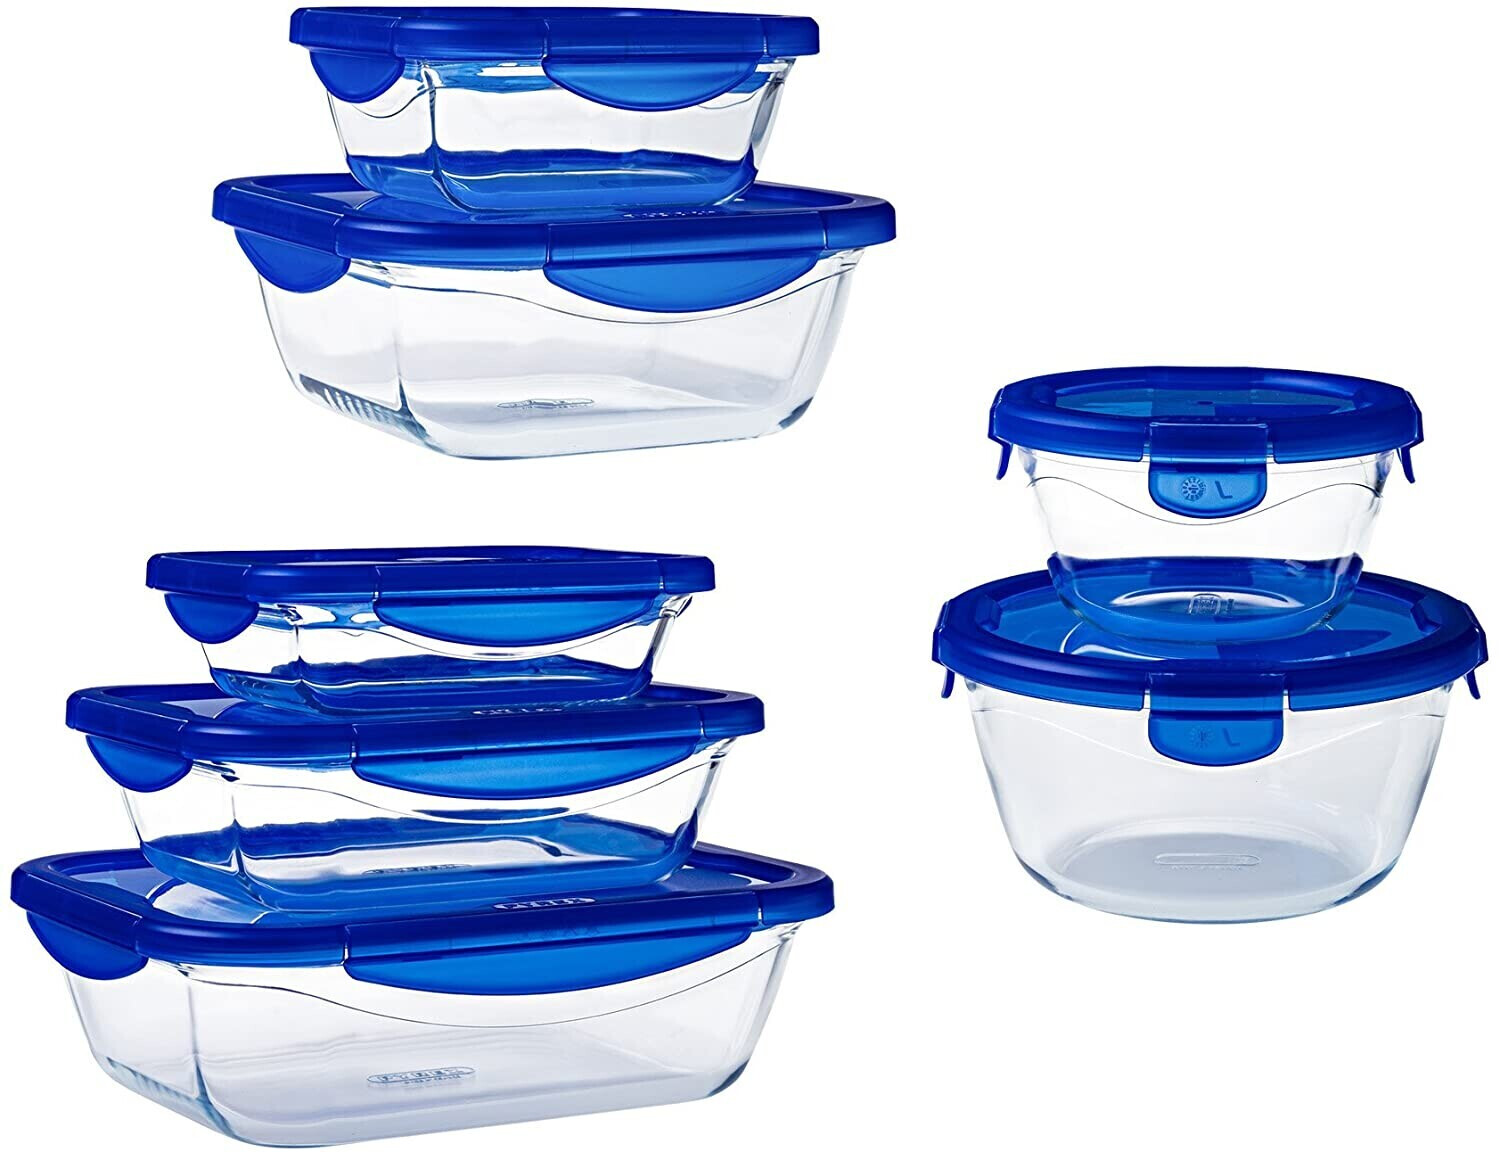 Pyrex 7 Cup Glass Storage Container with Blue Lid Delivery - DoorDash